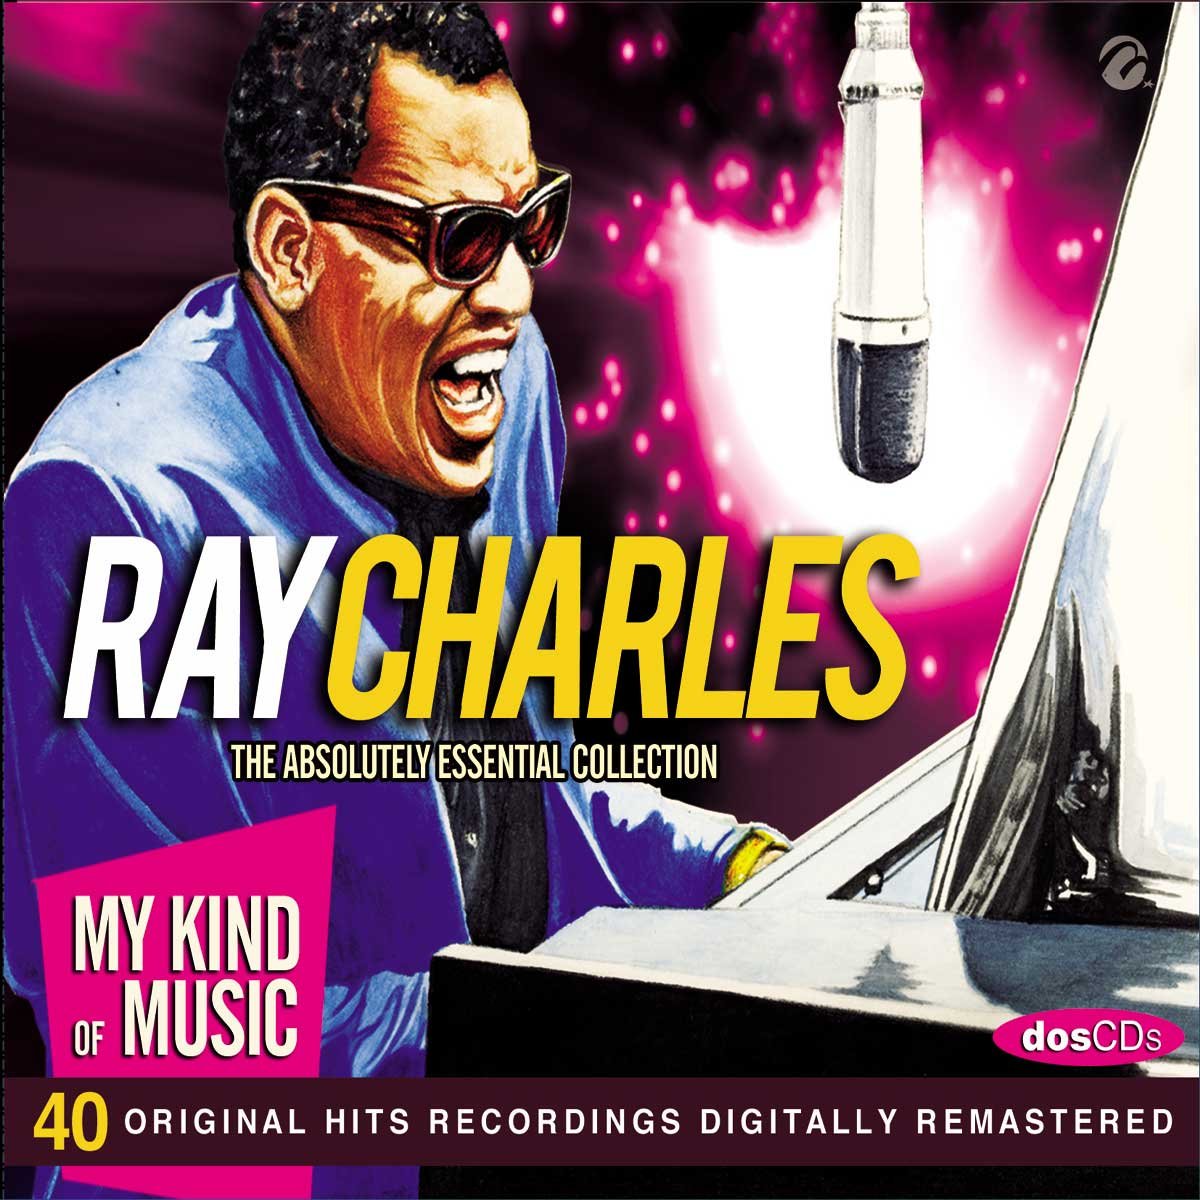 2 Cds   Ray Charles "ray Charles The Absolutely Essential Collection" -My Kind Of Music-